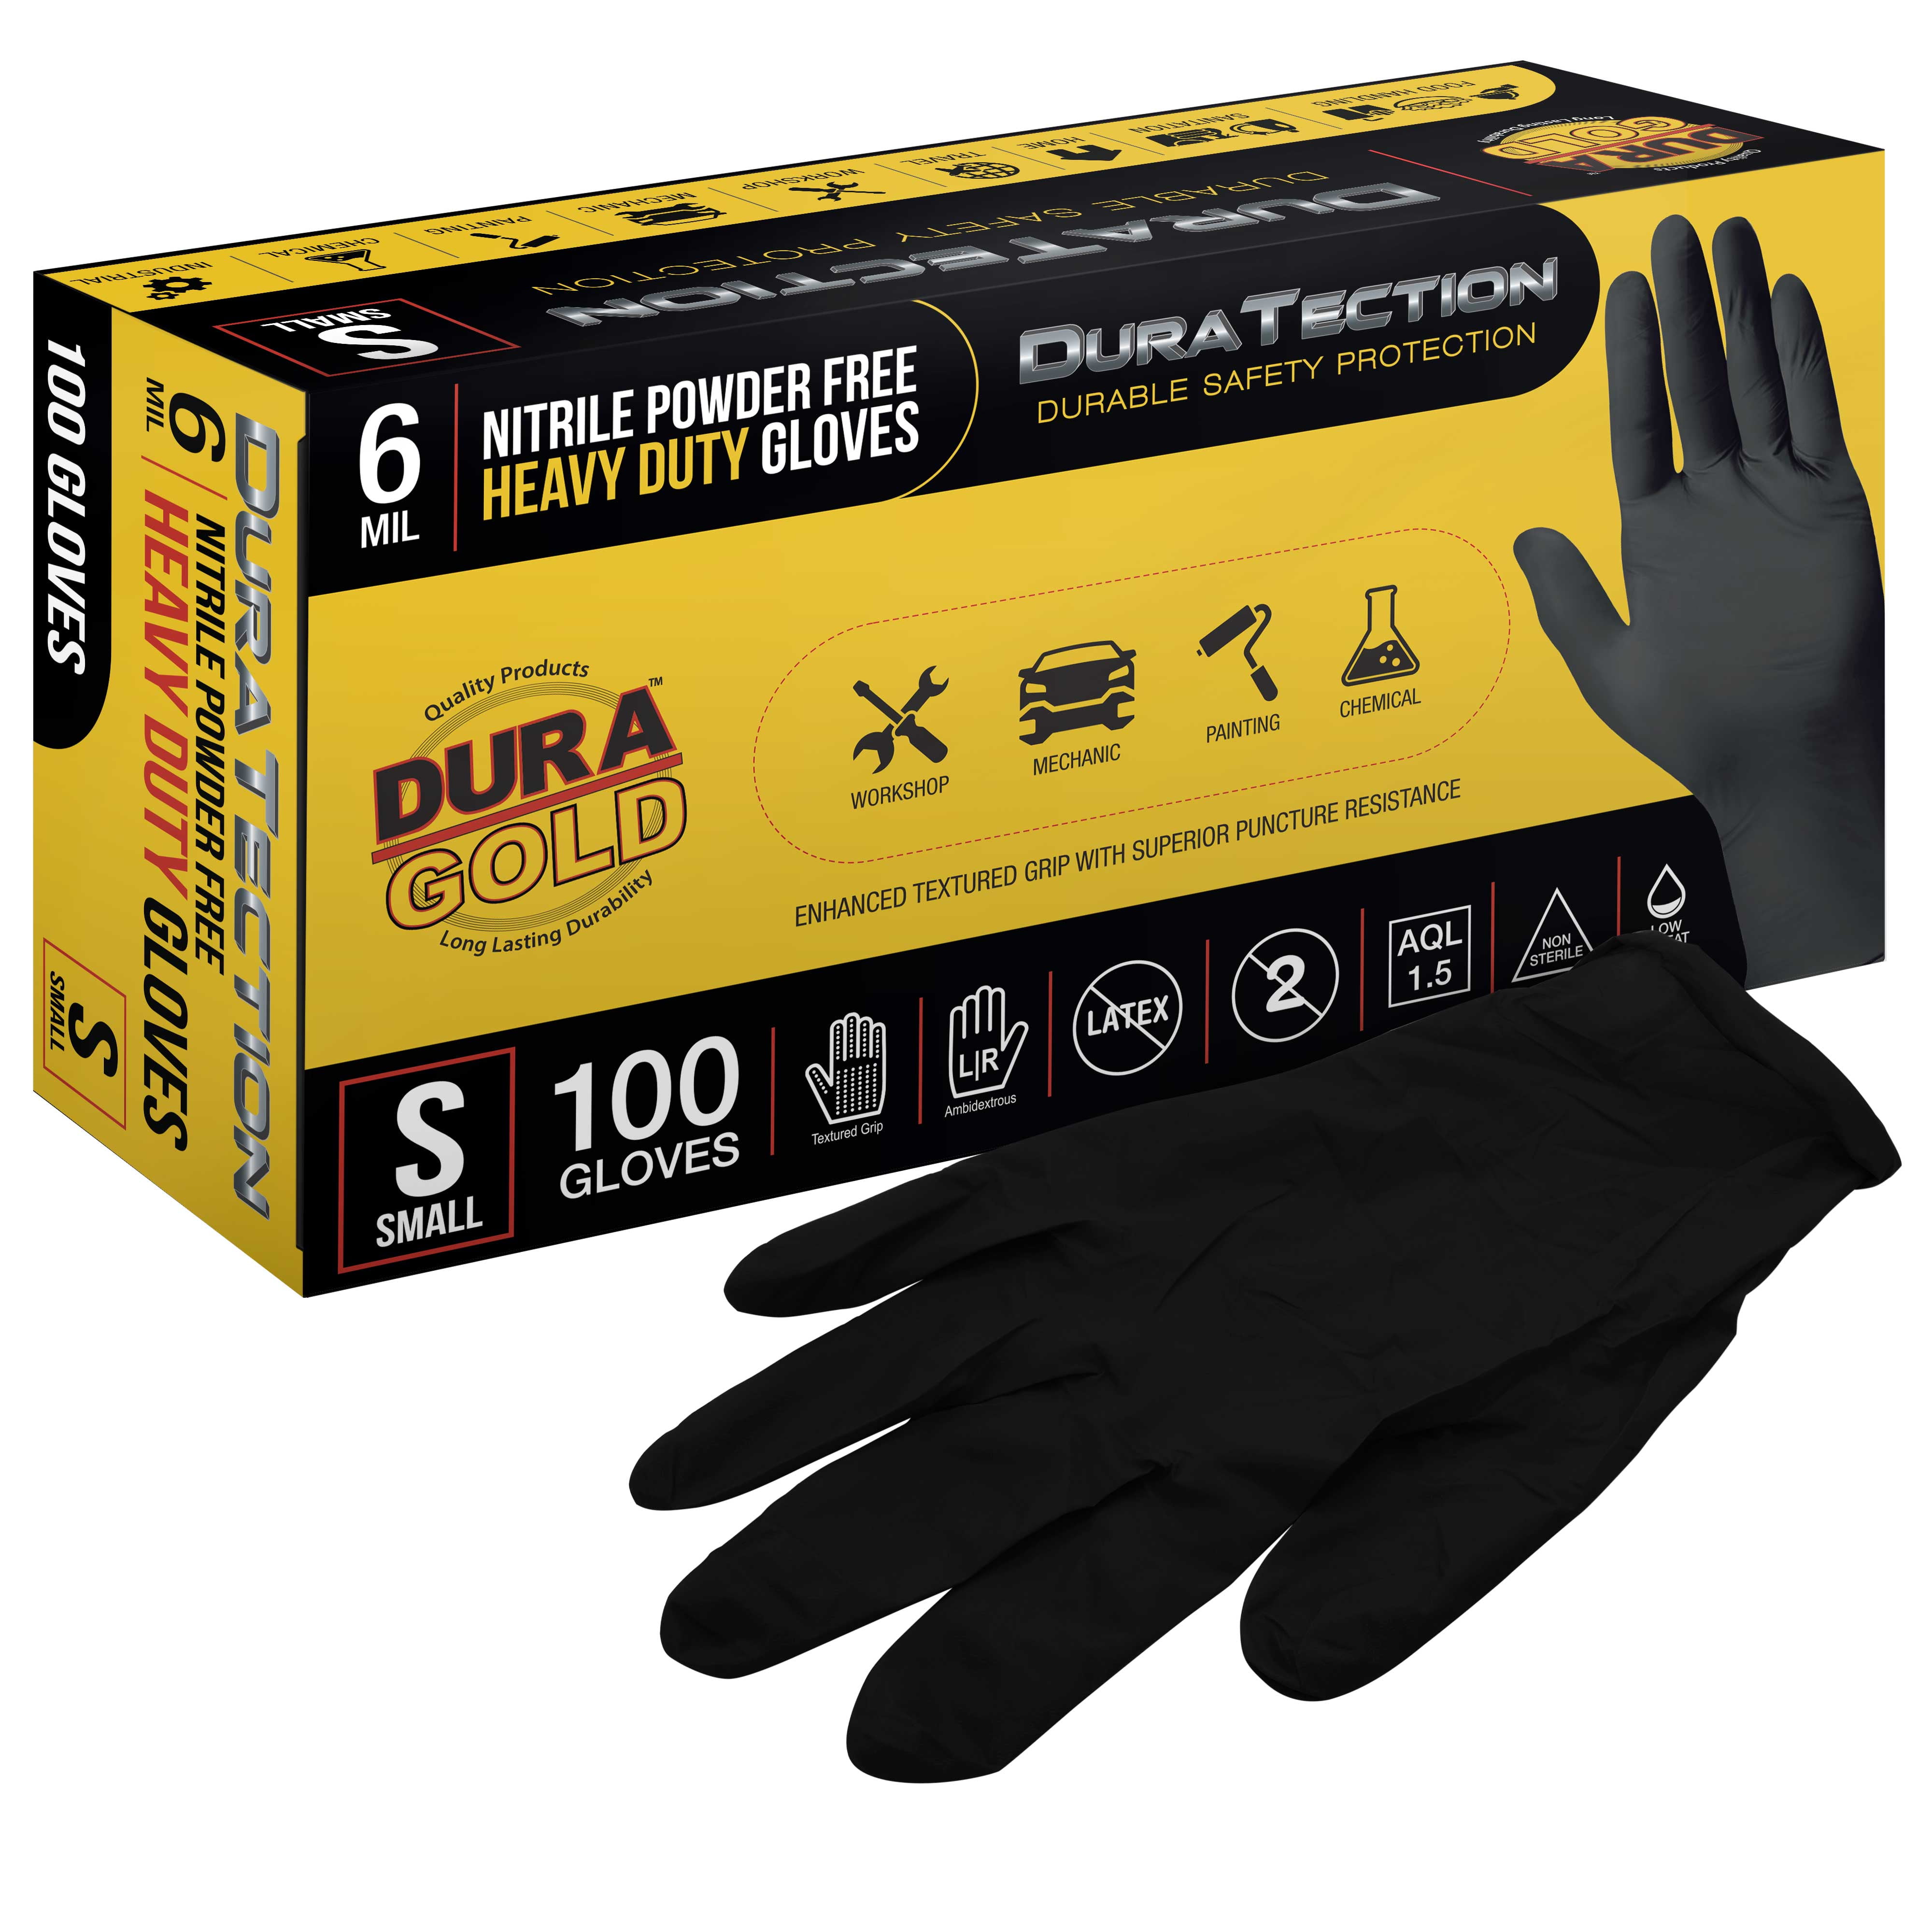 Dura-gold HD Black Nitrile Disposable Gloves, Box of 100, Size XX-Large, 6 Mil - Latex Free, Powder Free, Textured Grip, Food Safe